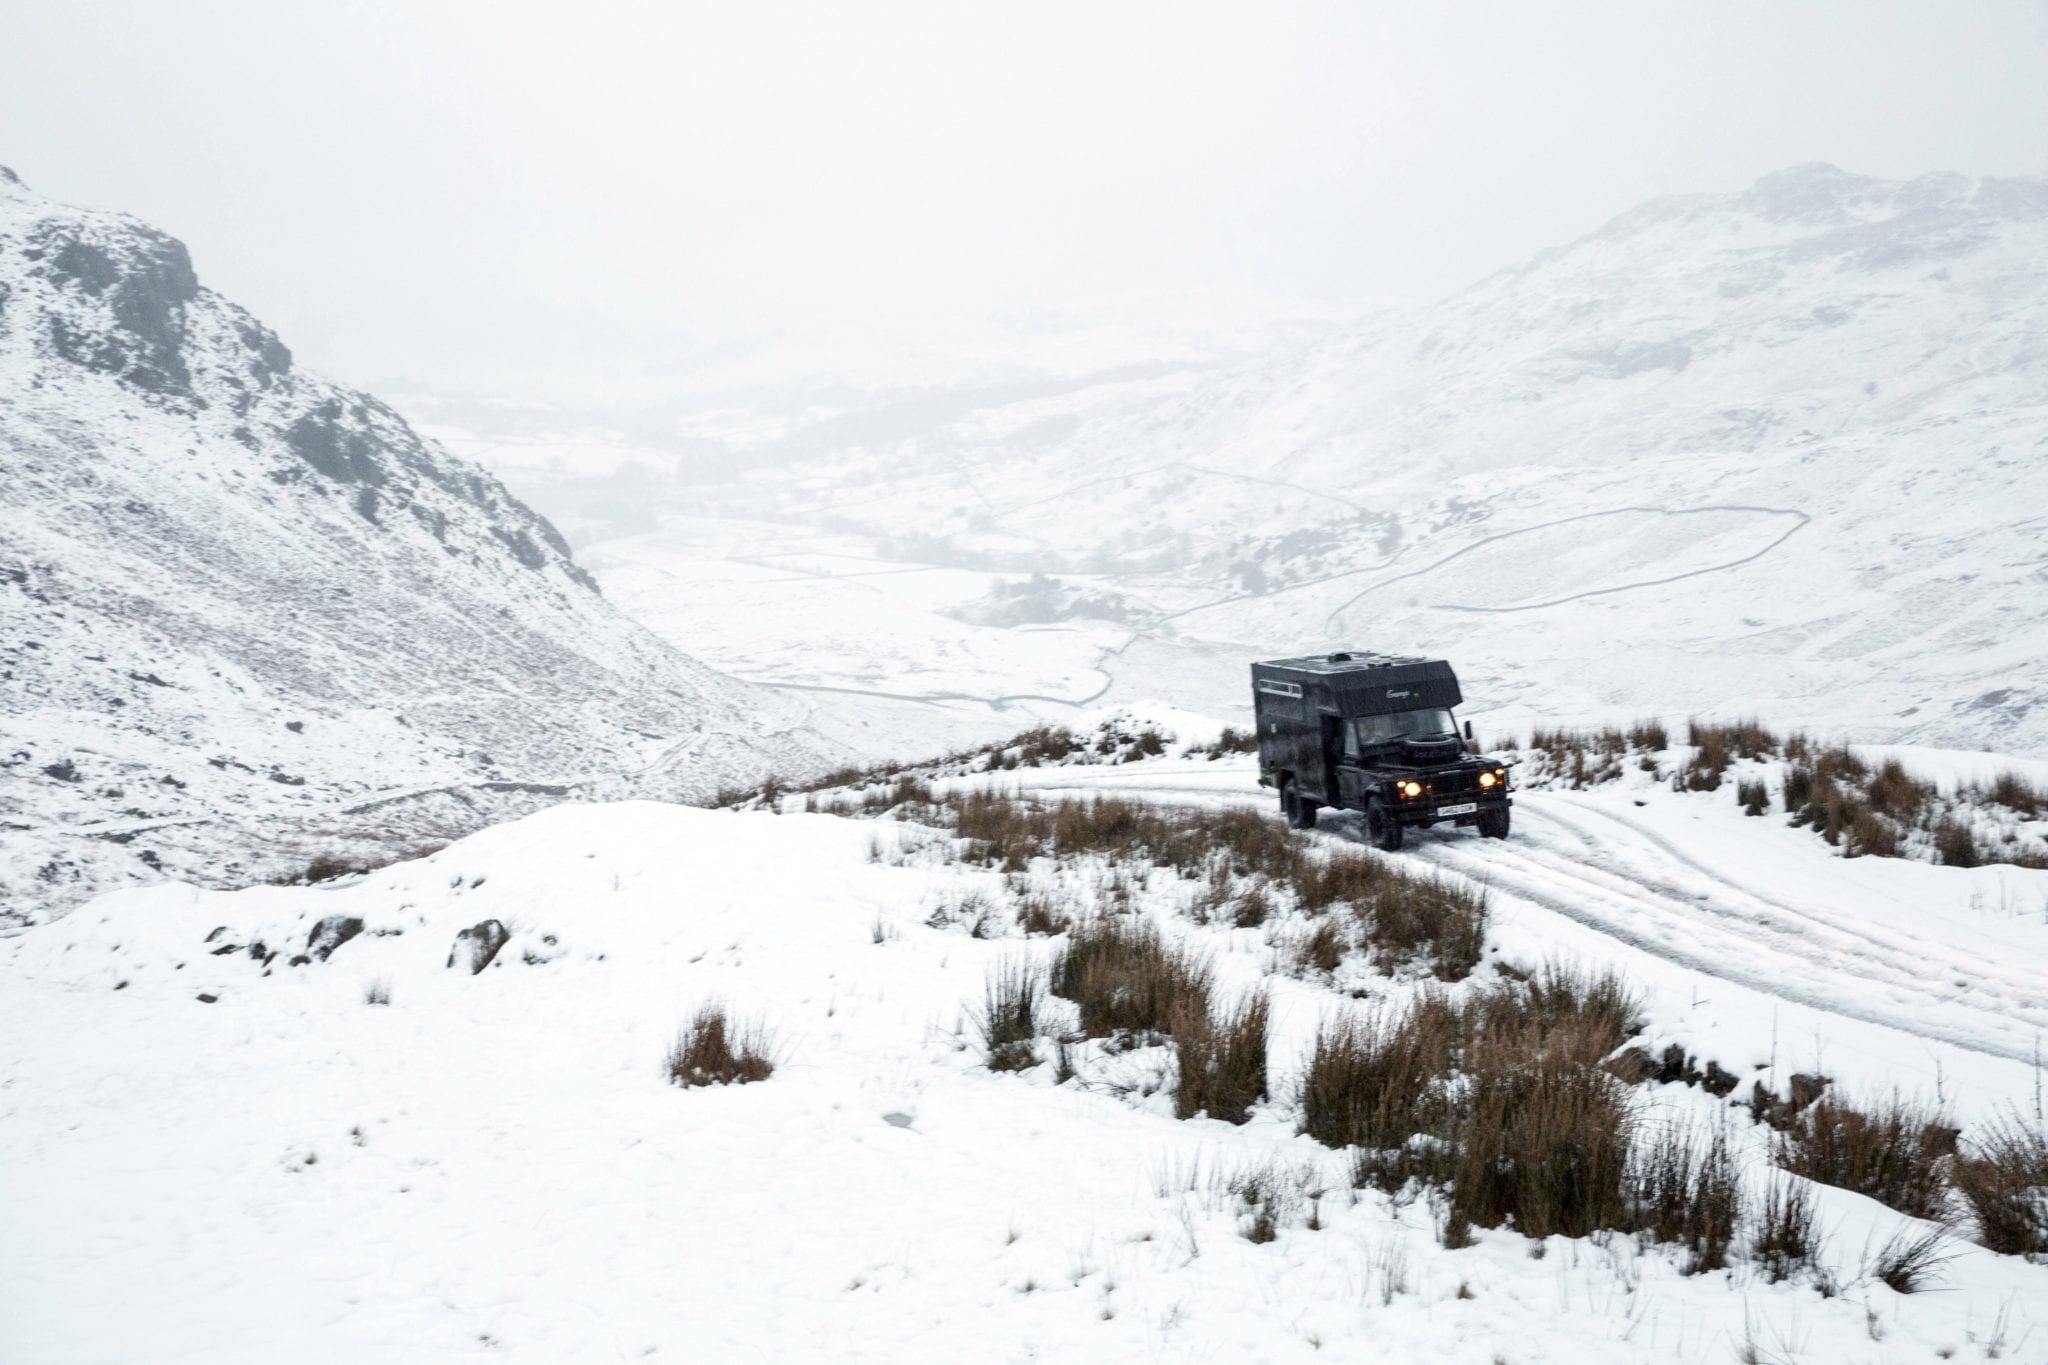 A landrover campervan in the snowy mountains